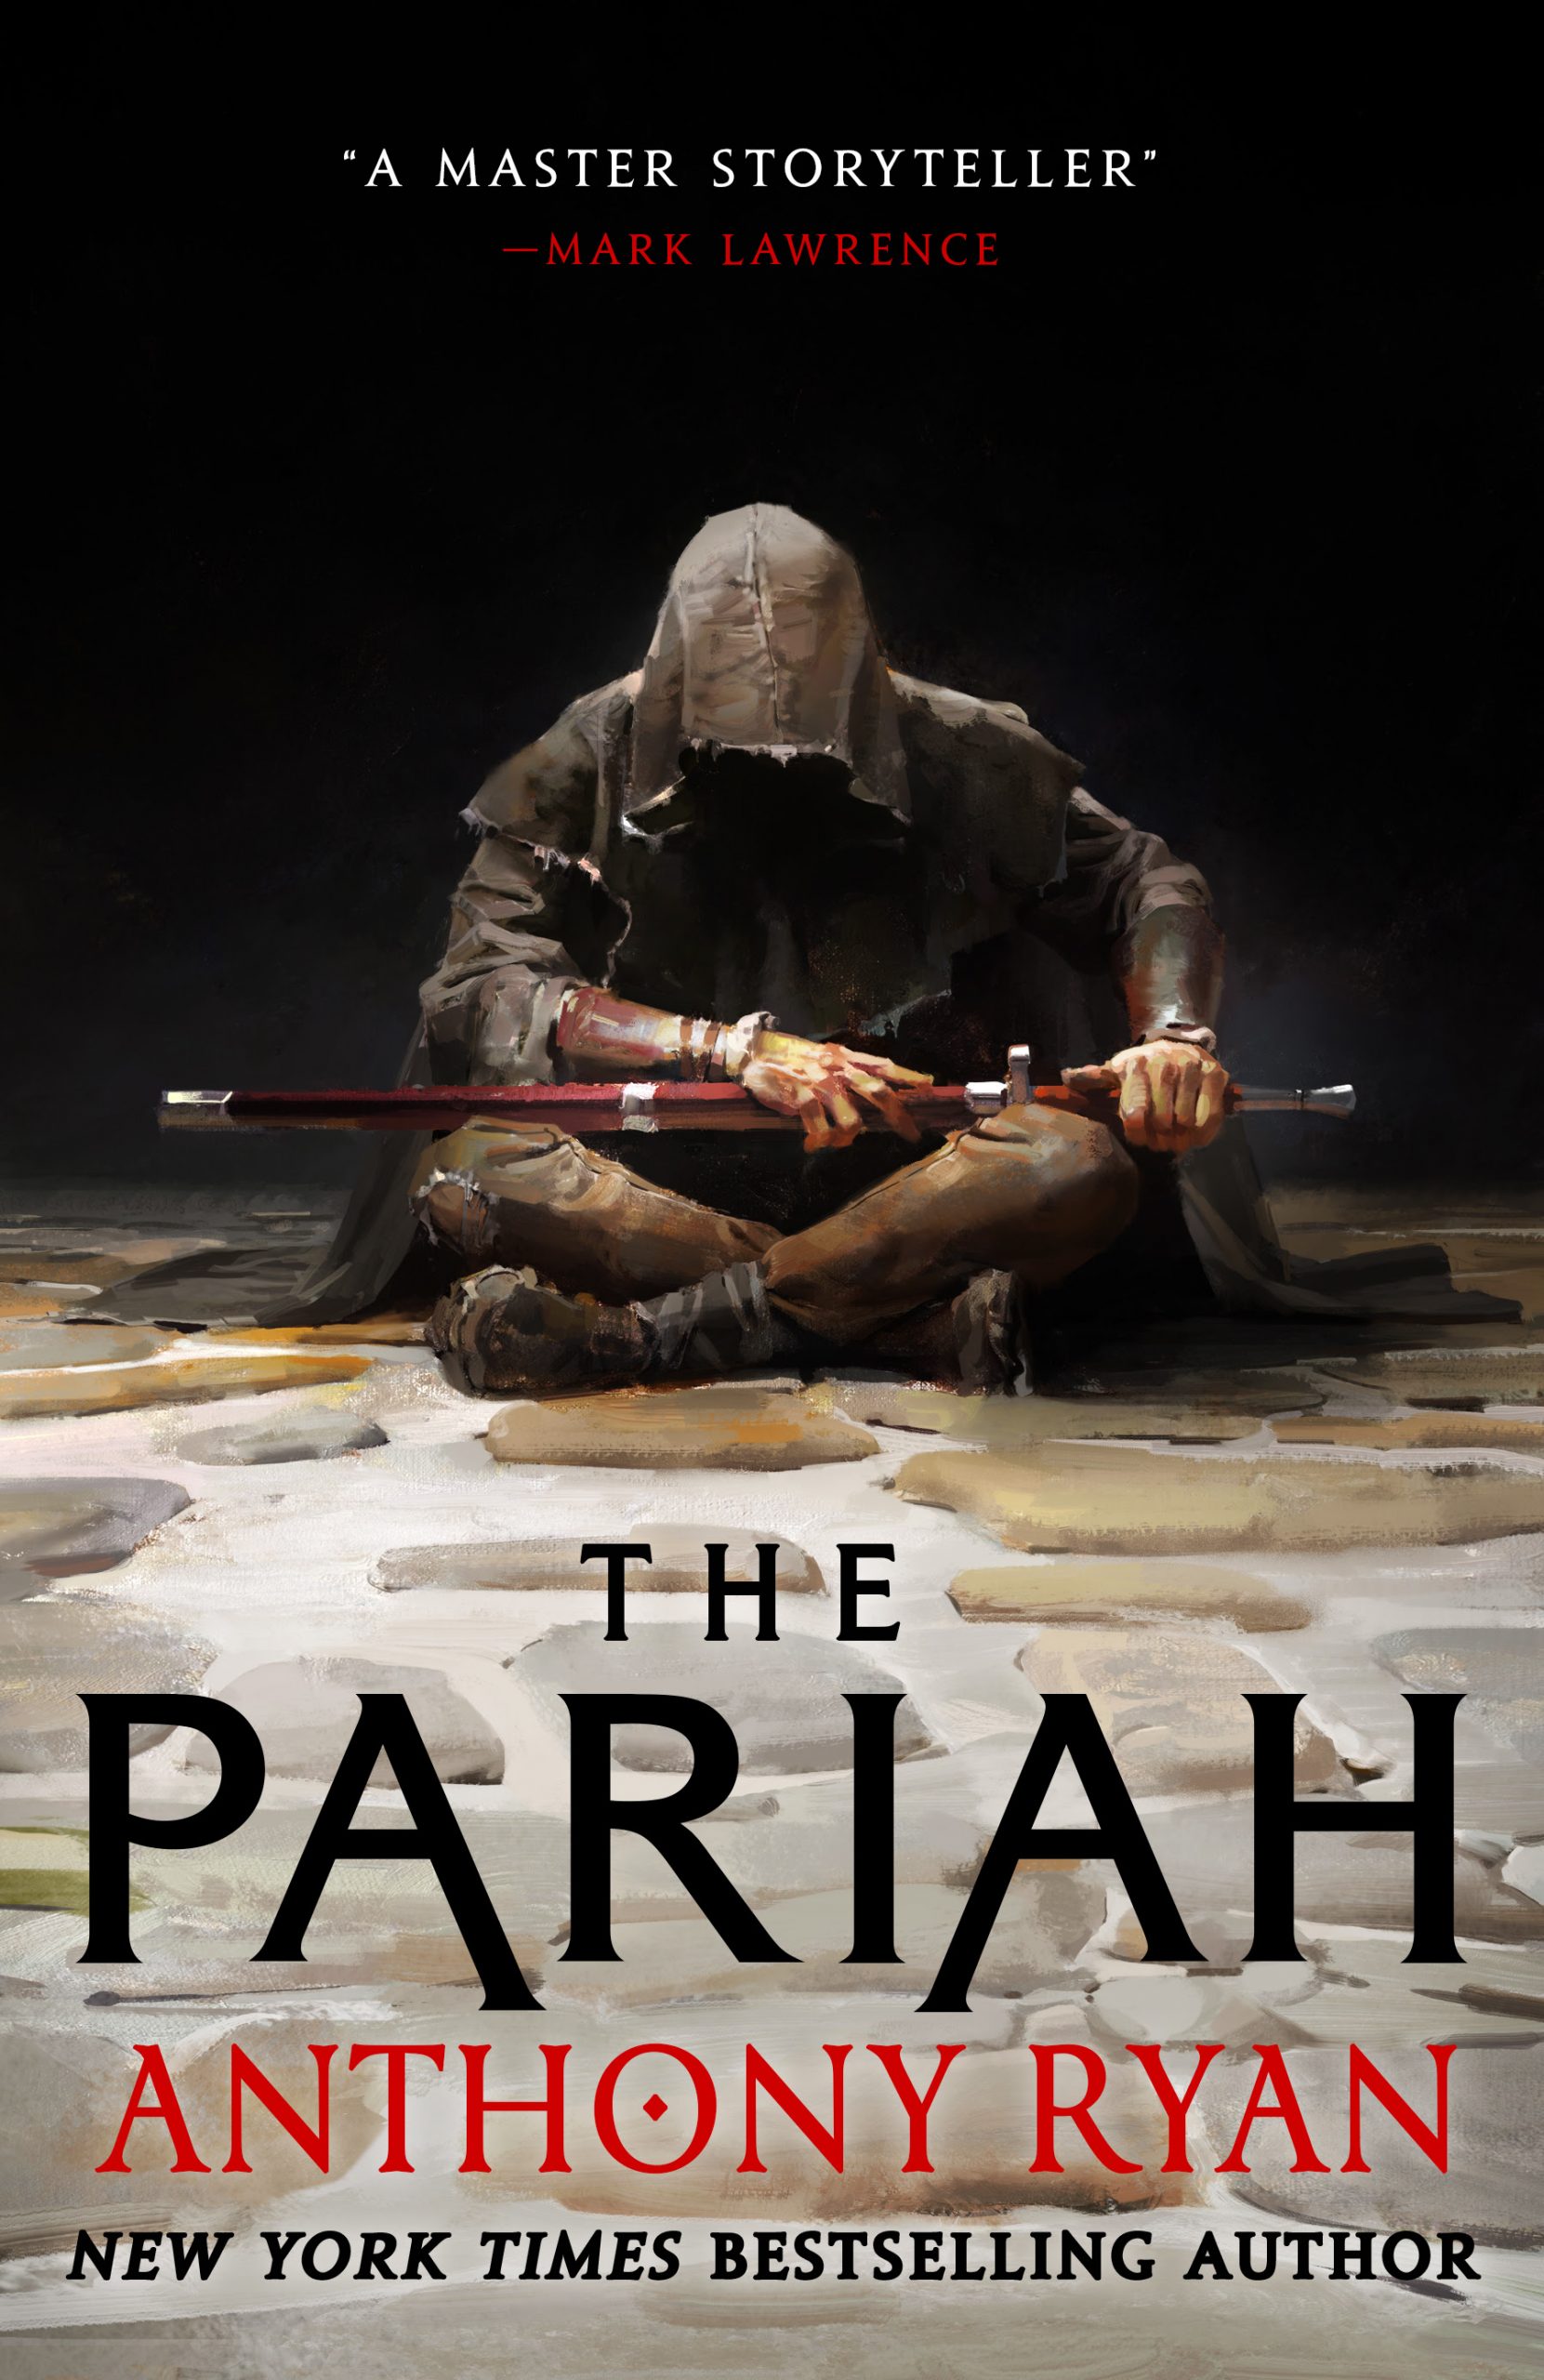 The Pariah by Anthony Ryan Read